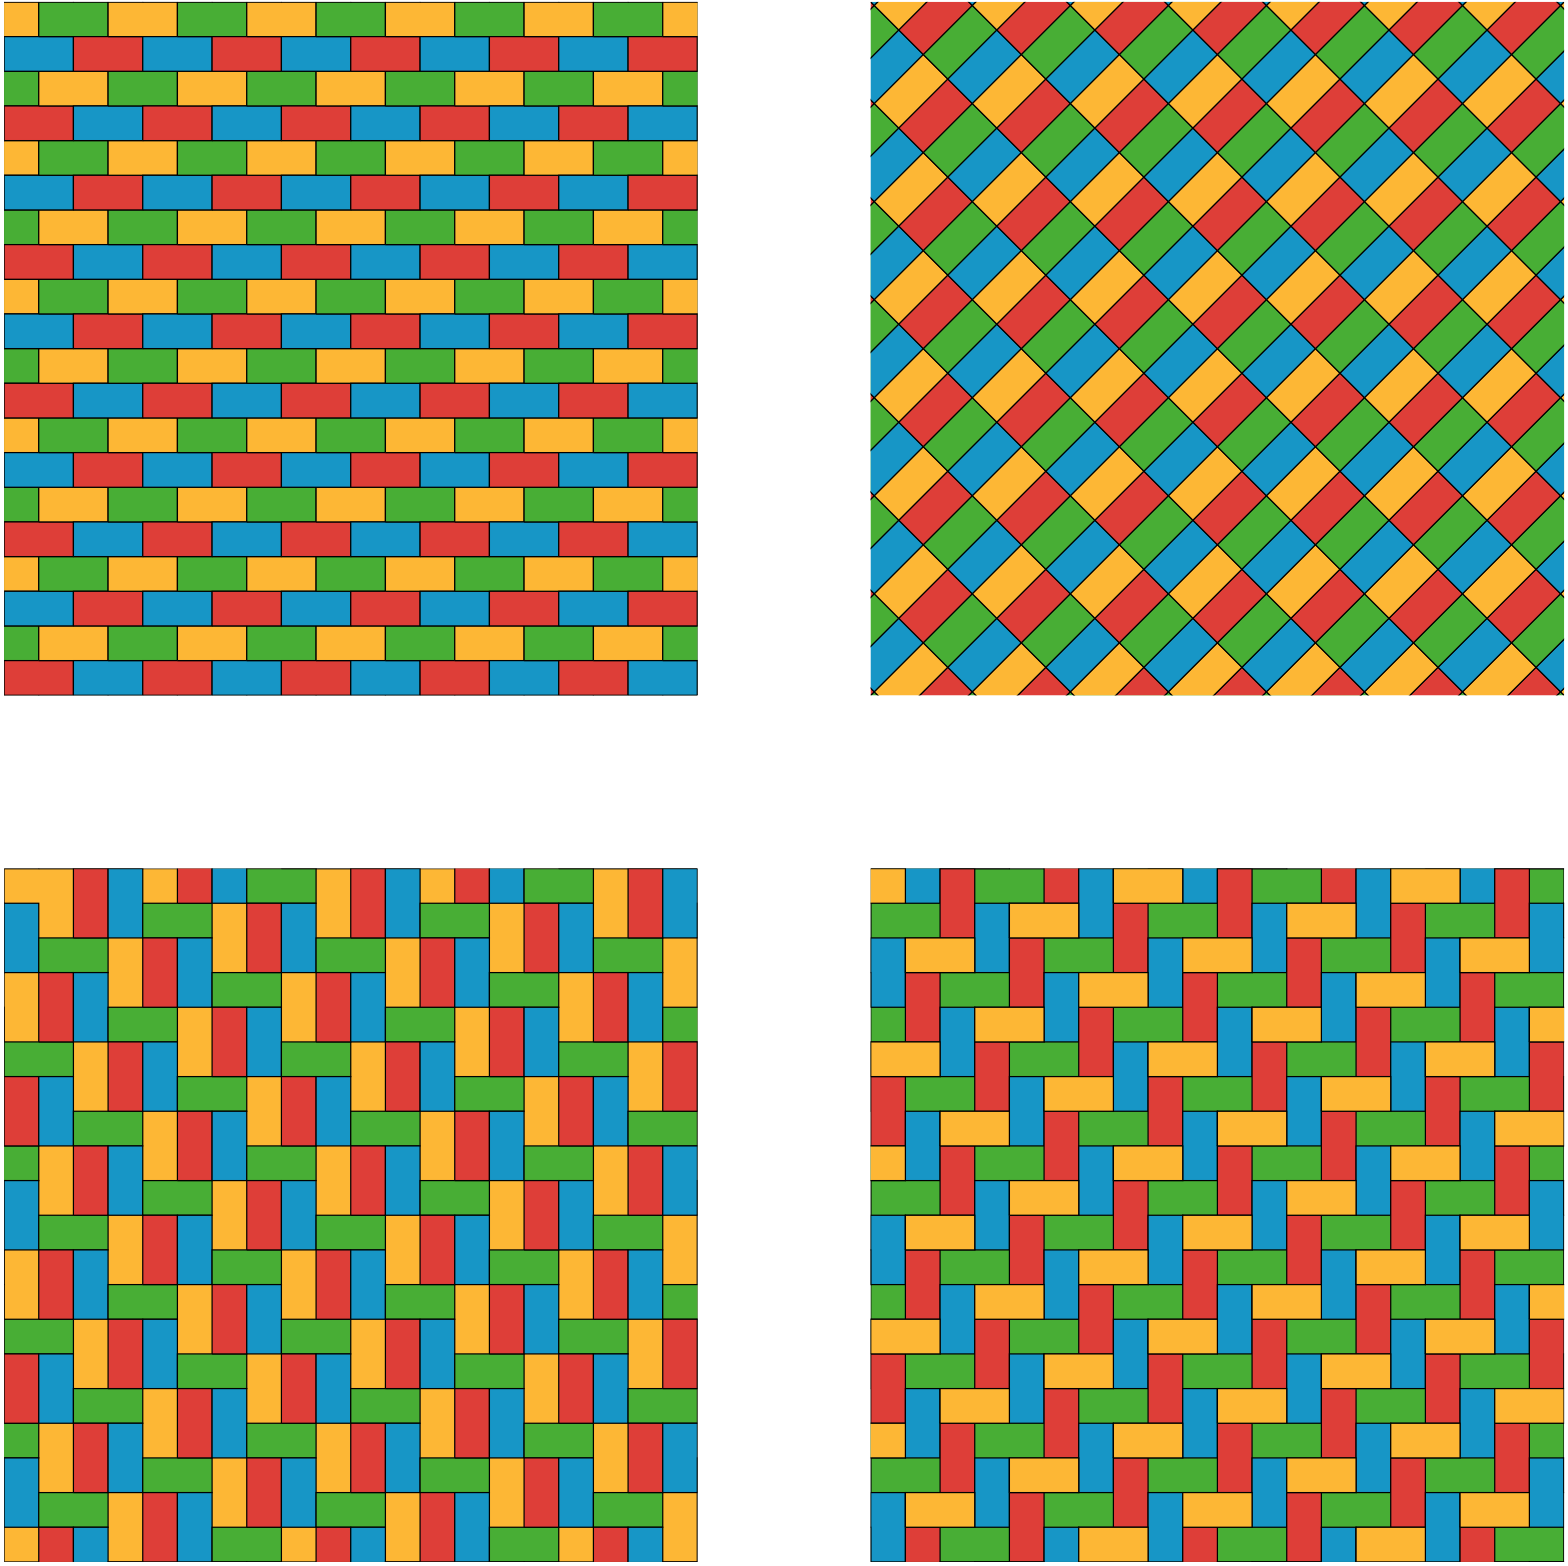 This should not be a alt text description. Tactile is needed.....Four tessellations.One tessellation has groups repeating rows of two rectangles. The first row has yellow and green alternating rectangles and the second row has blue and red alternating rectangles. Another tessellation has alternating blue and red alternating rectangles slanted upward and to the right. Below the red and blue rectangles are alternating yellow and green rectangles.  A third tessellation has groups of three rectangles next to one another, sharing the long sides: the long sides are vertical. In addition to these groups of three rectangles, there are single rectangles with the long side lying horizontally. A fourth tessellation has alternating rectangles placed horizontally then vertically.